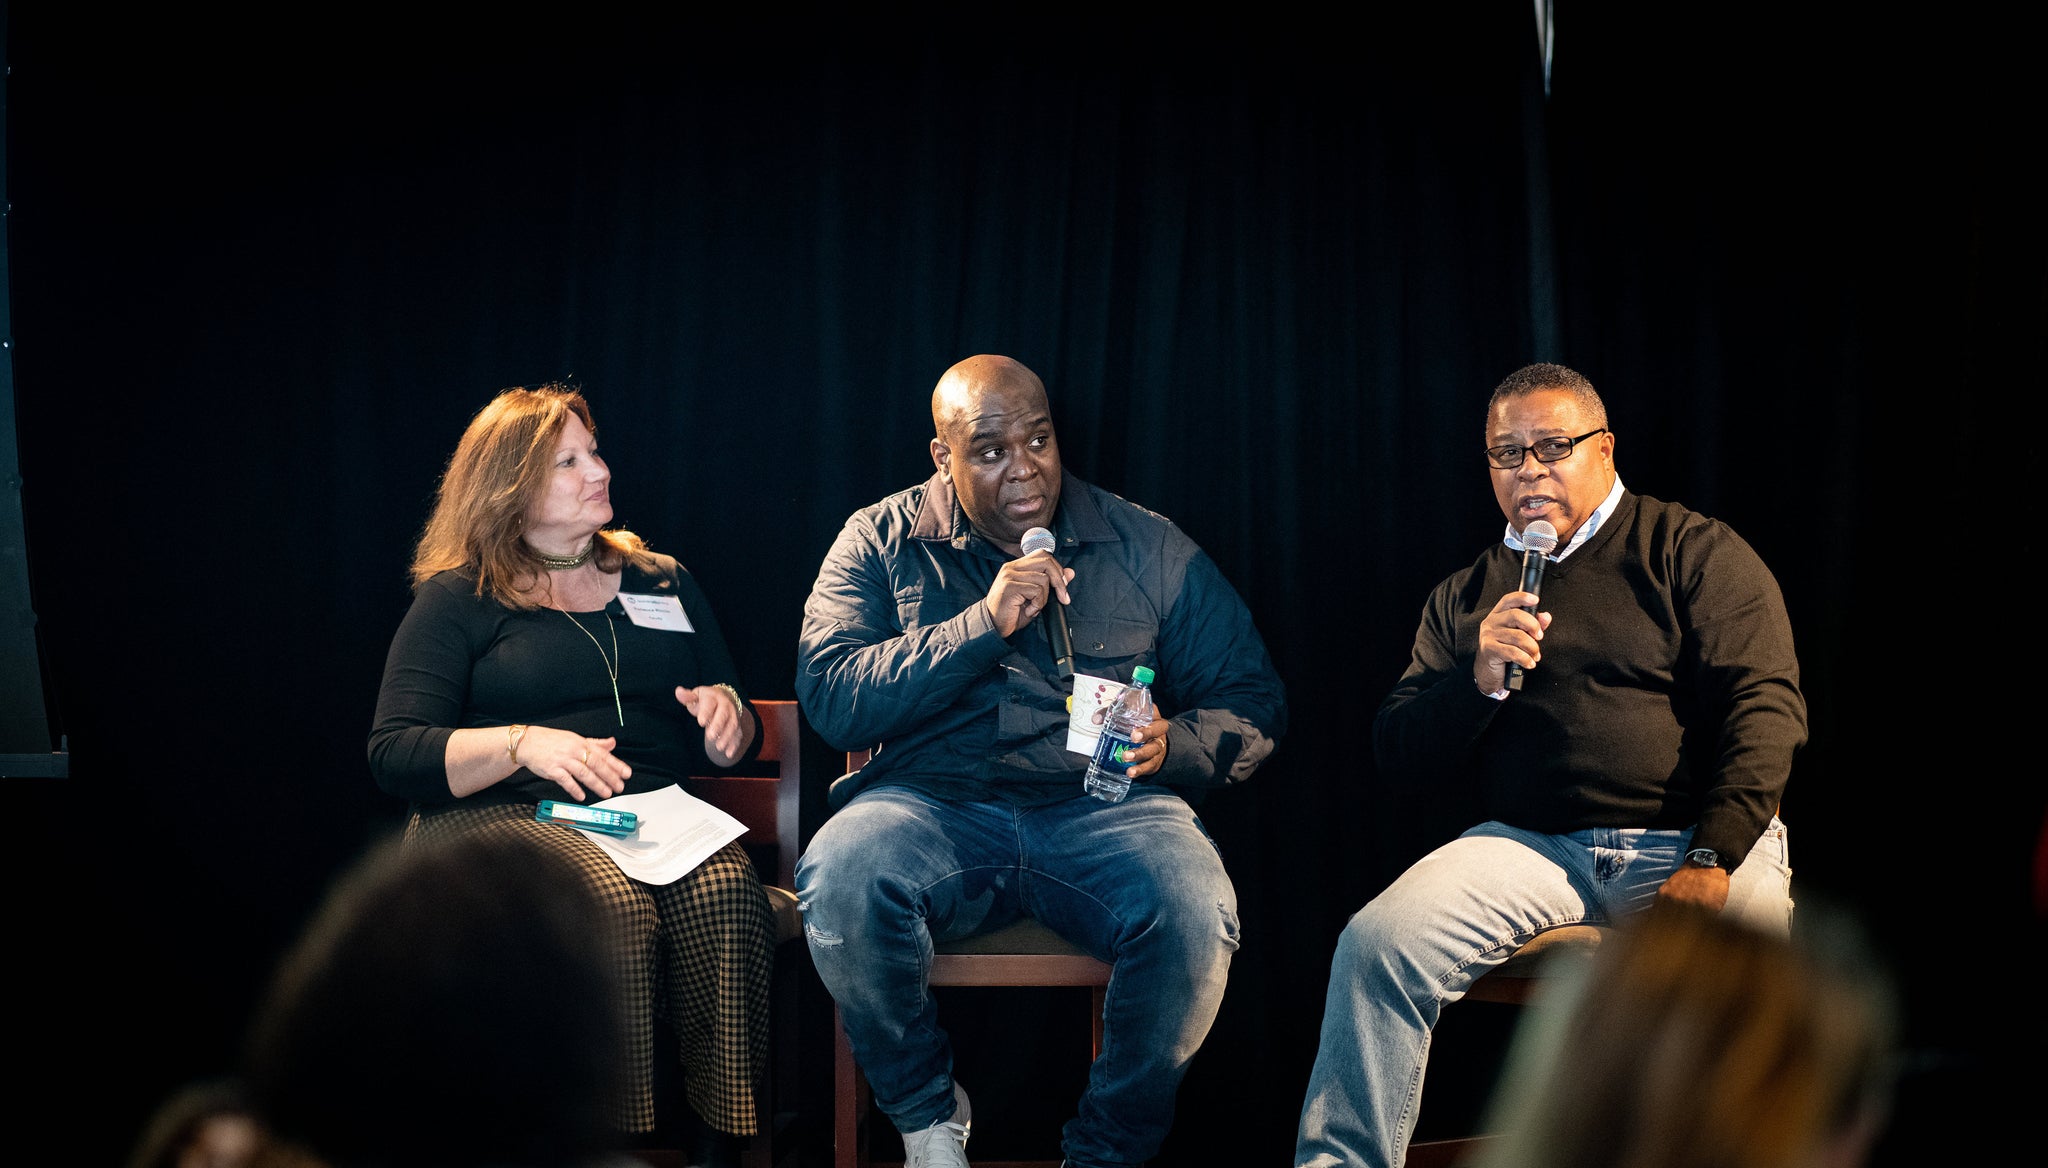 Make Your Mark: An In-Depth Conversation on Impact with Boston Community Leaders